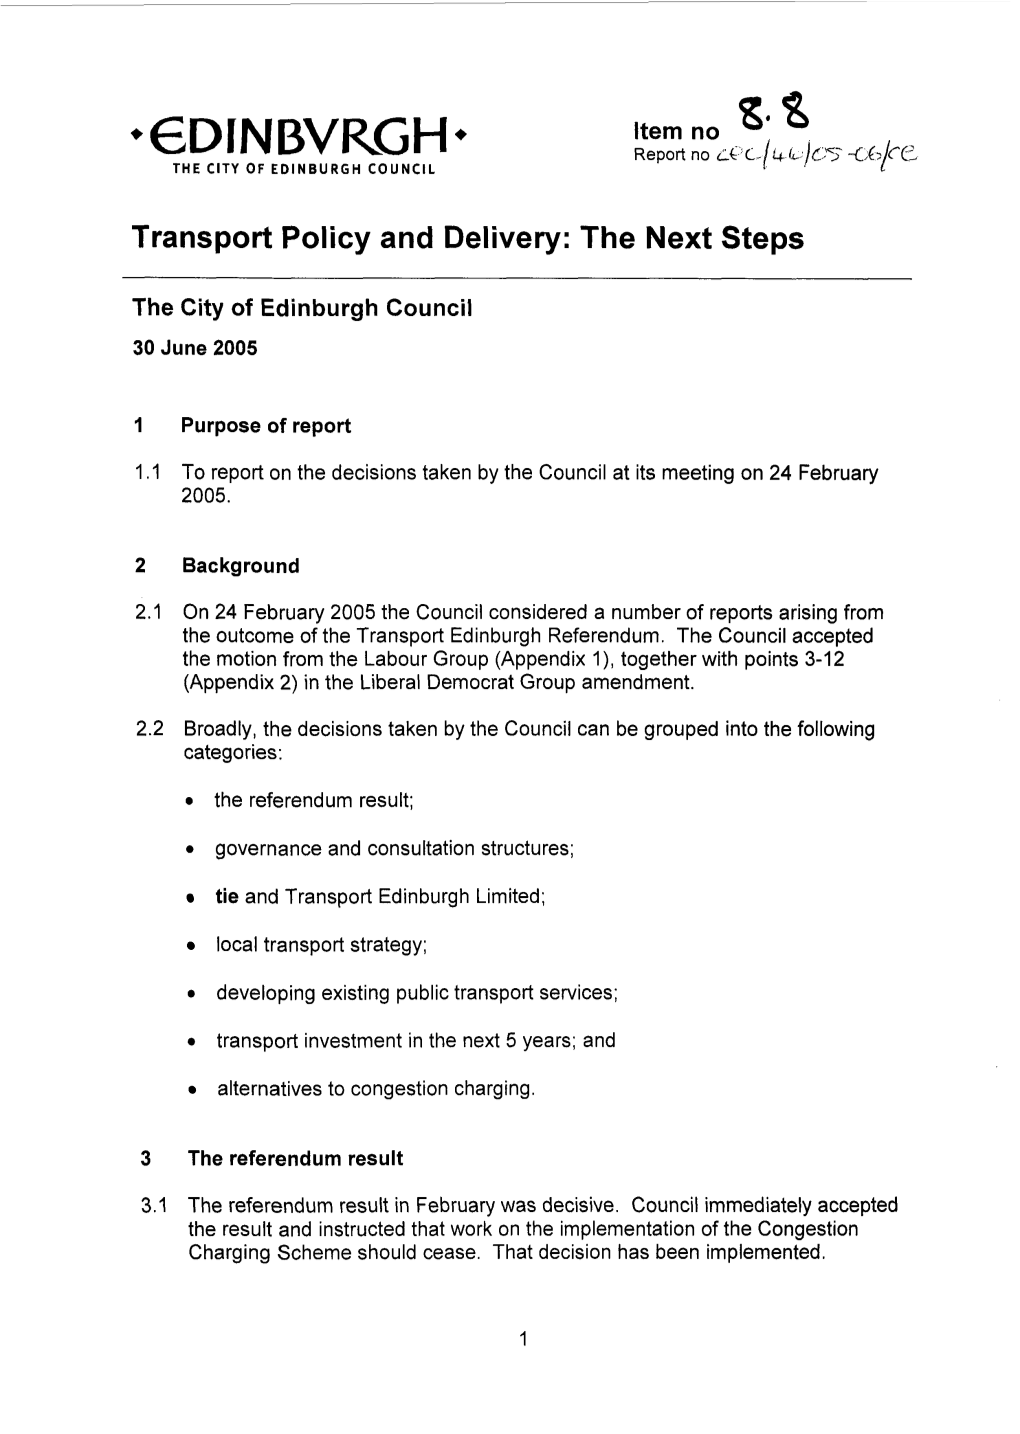 Transport Policy and Delivery: the Next Steps